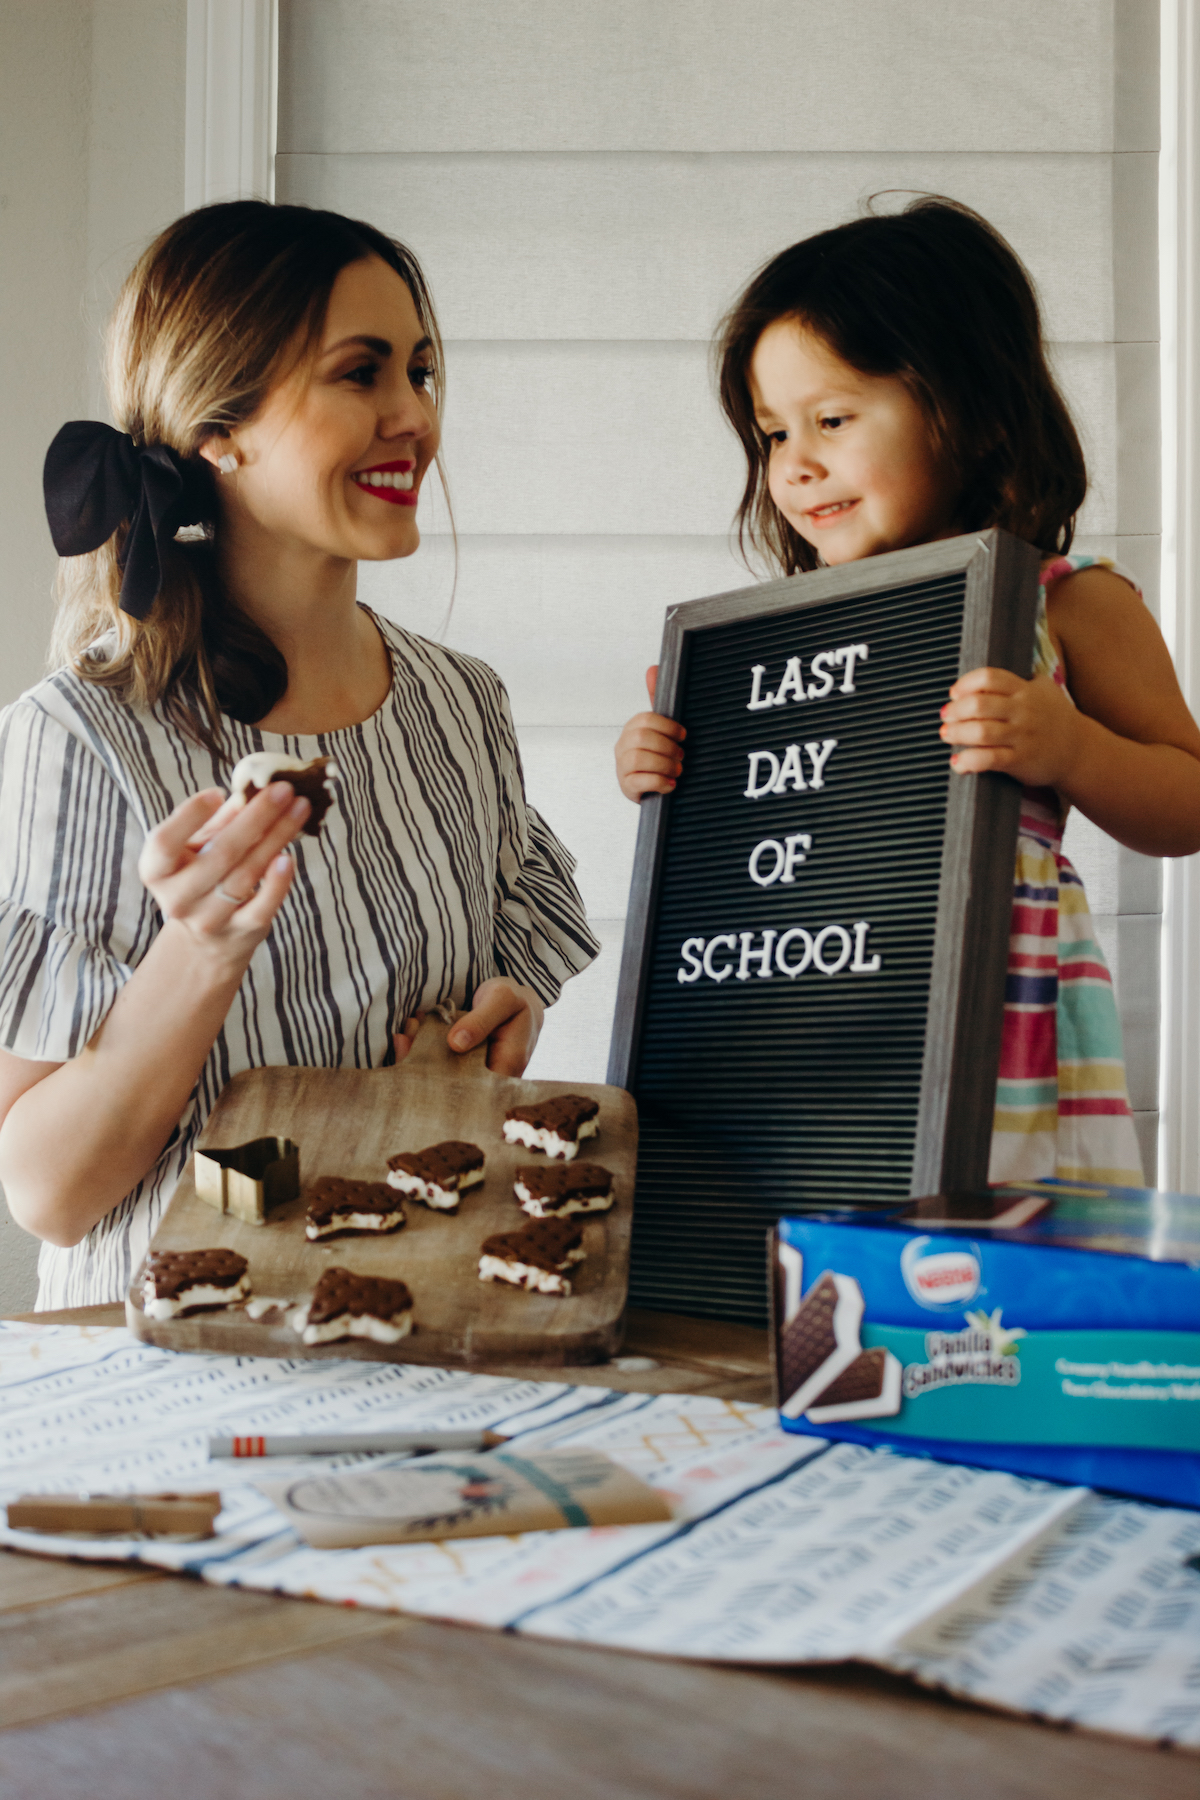 School Party Snack Ideas + Free Printable “When I Grow Up” Card